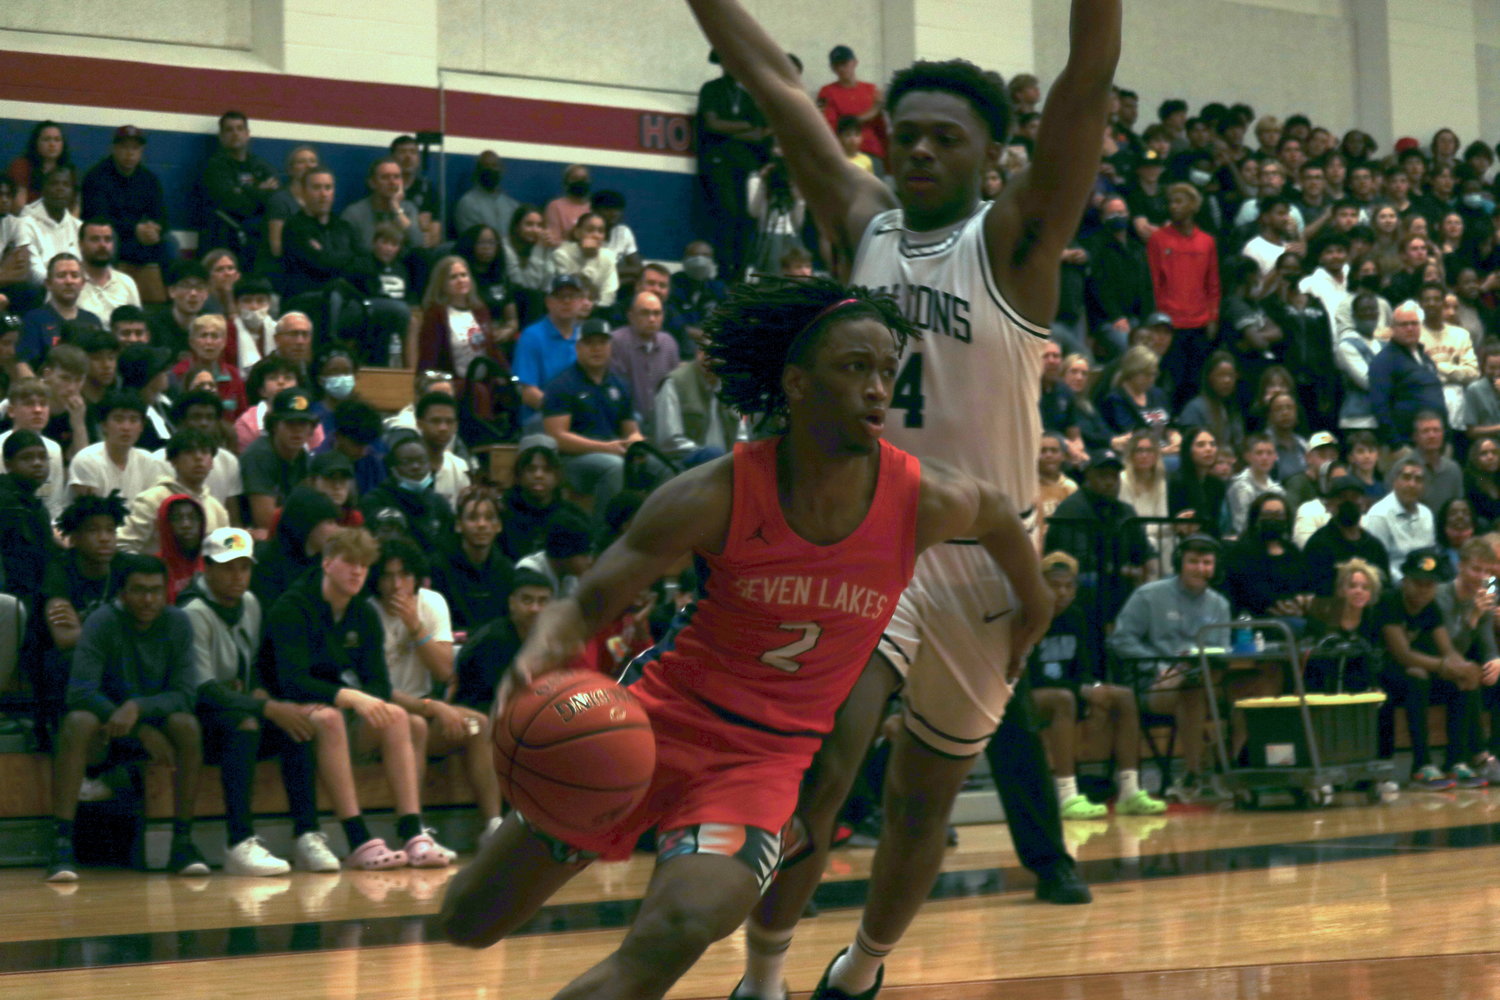 Seven Lakes’ Tahaad Davis drives past Tompkins’ Carmelo Yakubu during Wednesday’s game at the Tompkins gym.